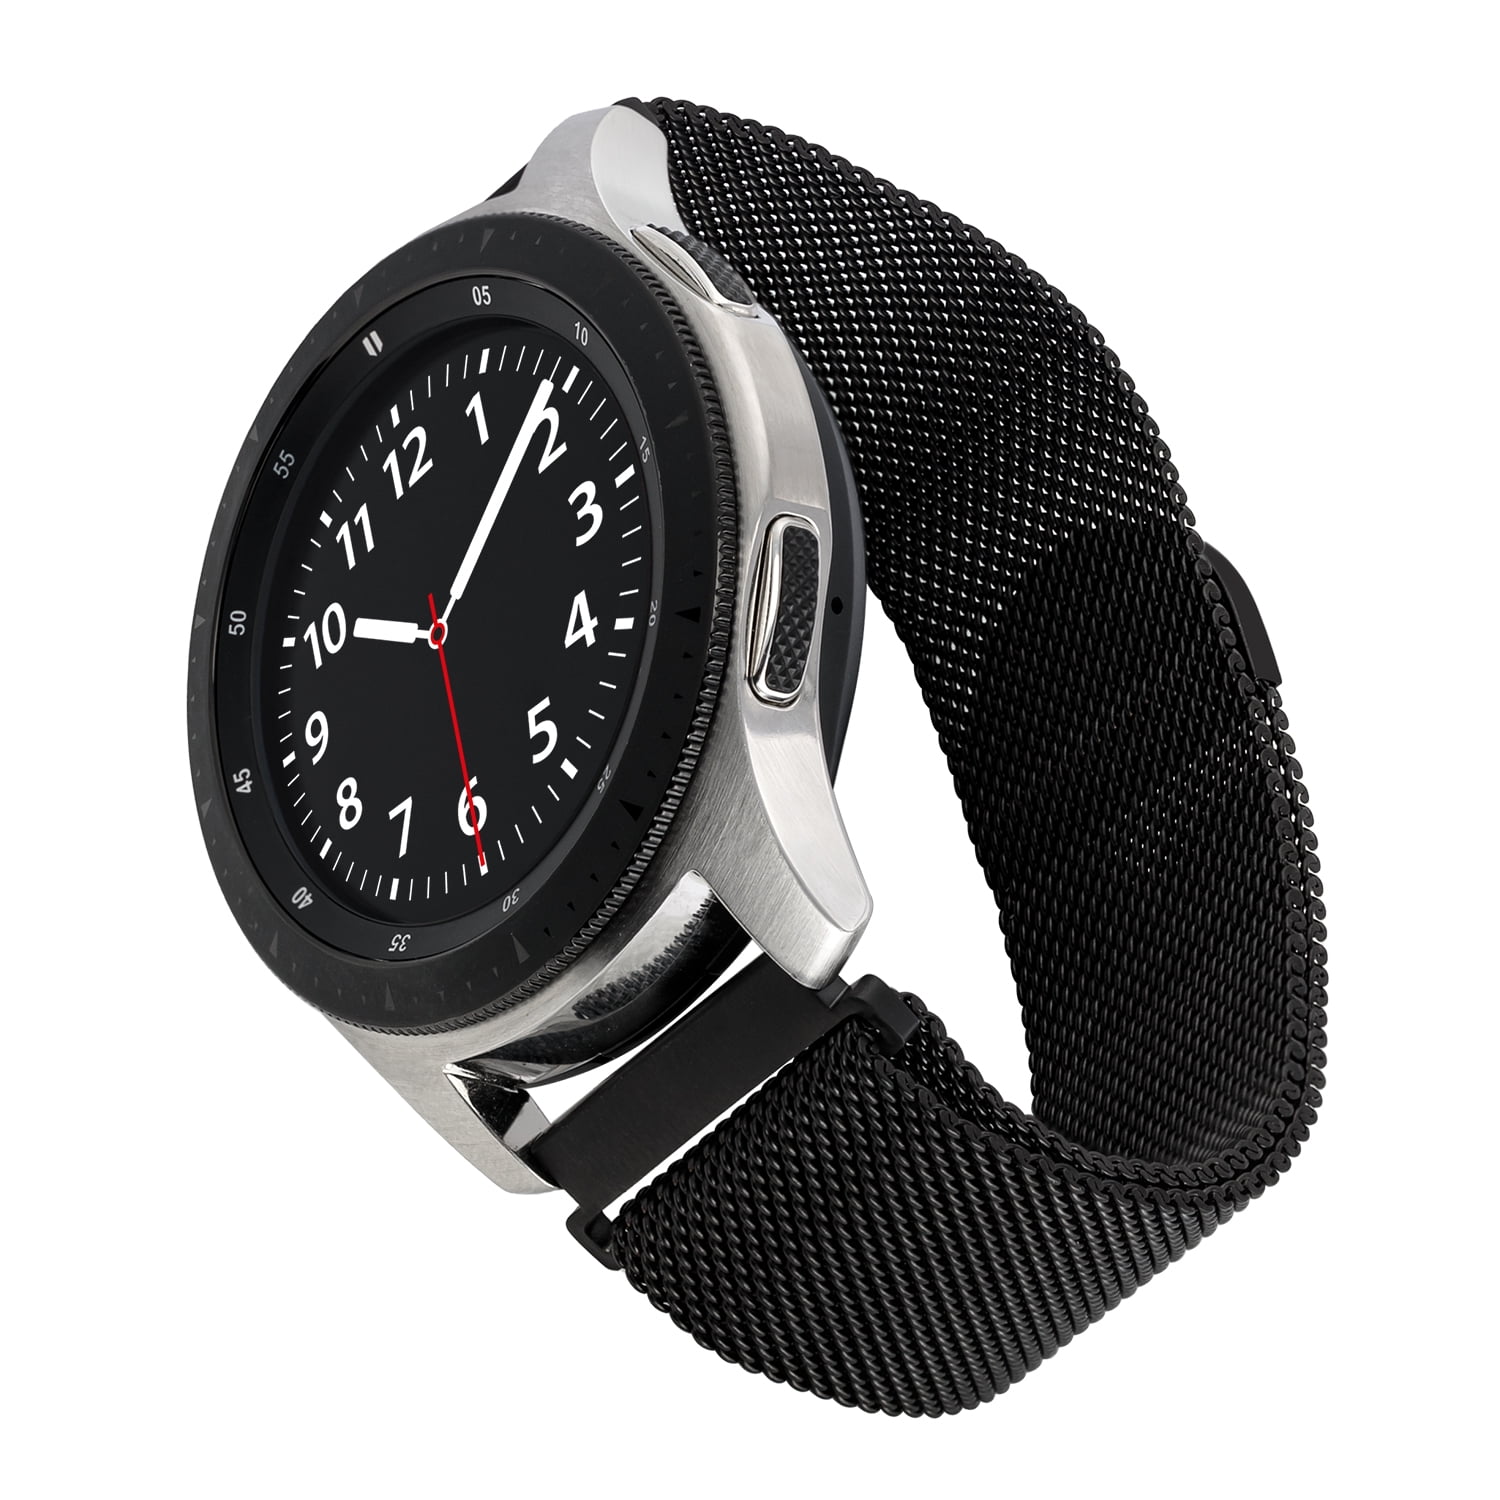 WITHit Black Stainless Steel Mesh Band for 20mm Samsung Universal Watch